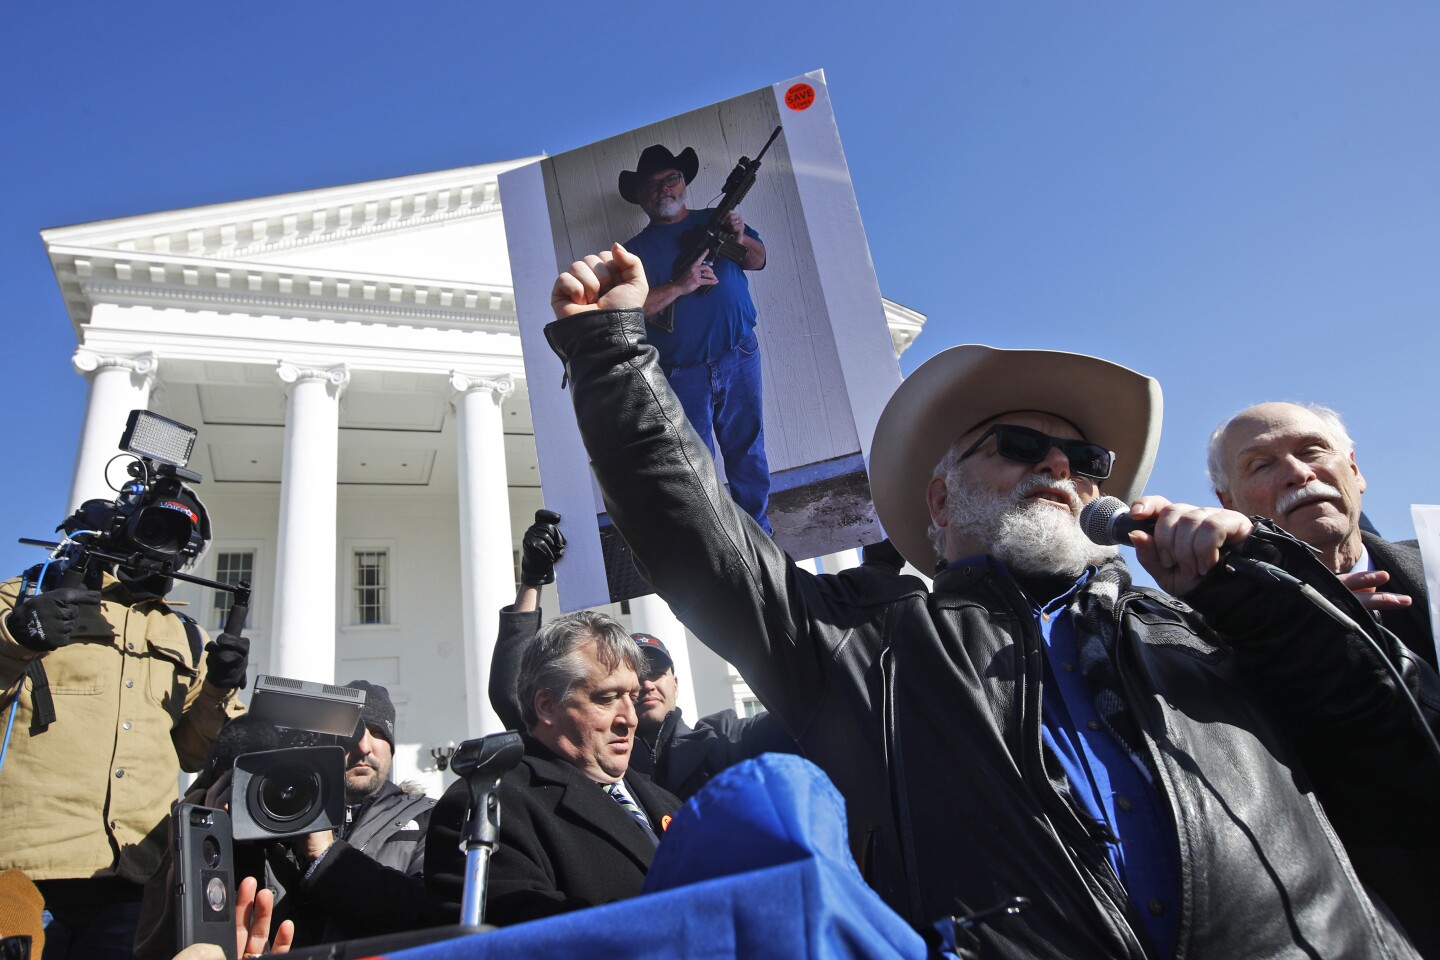 Thousands rally in Virginia’s capital for gun rights; police brace for trouble - Los ...1440 x 960